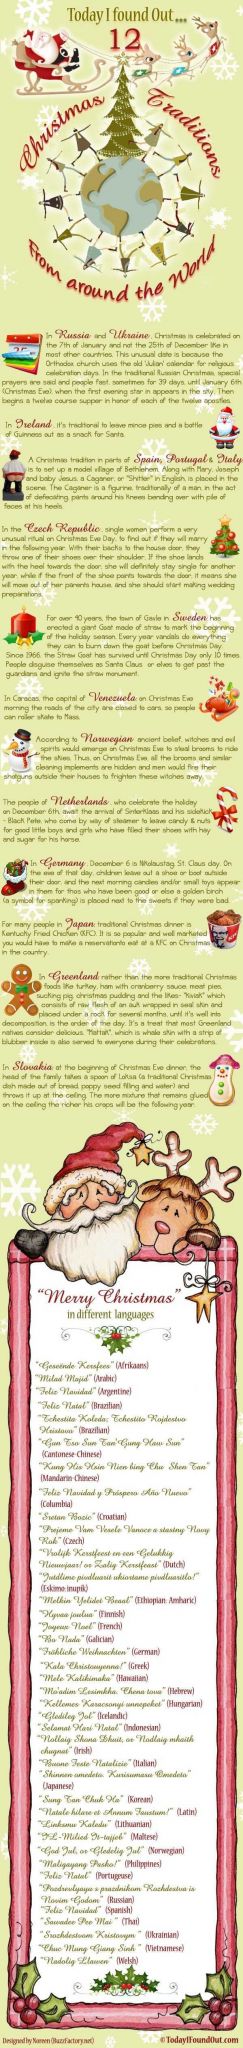 Christmas Worksheets for Kids together with 203 Best Christmas Around the World Images On Pinterest